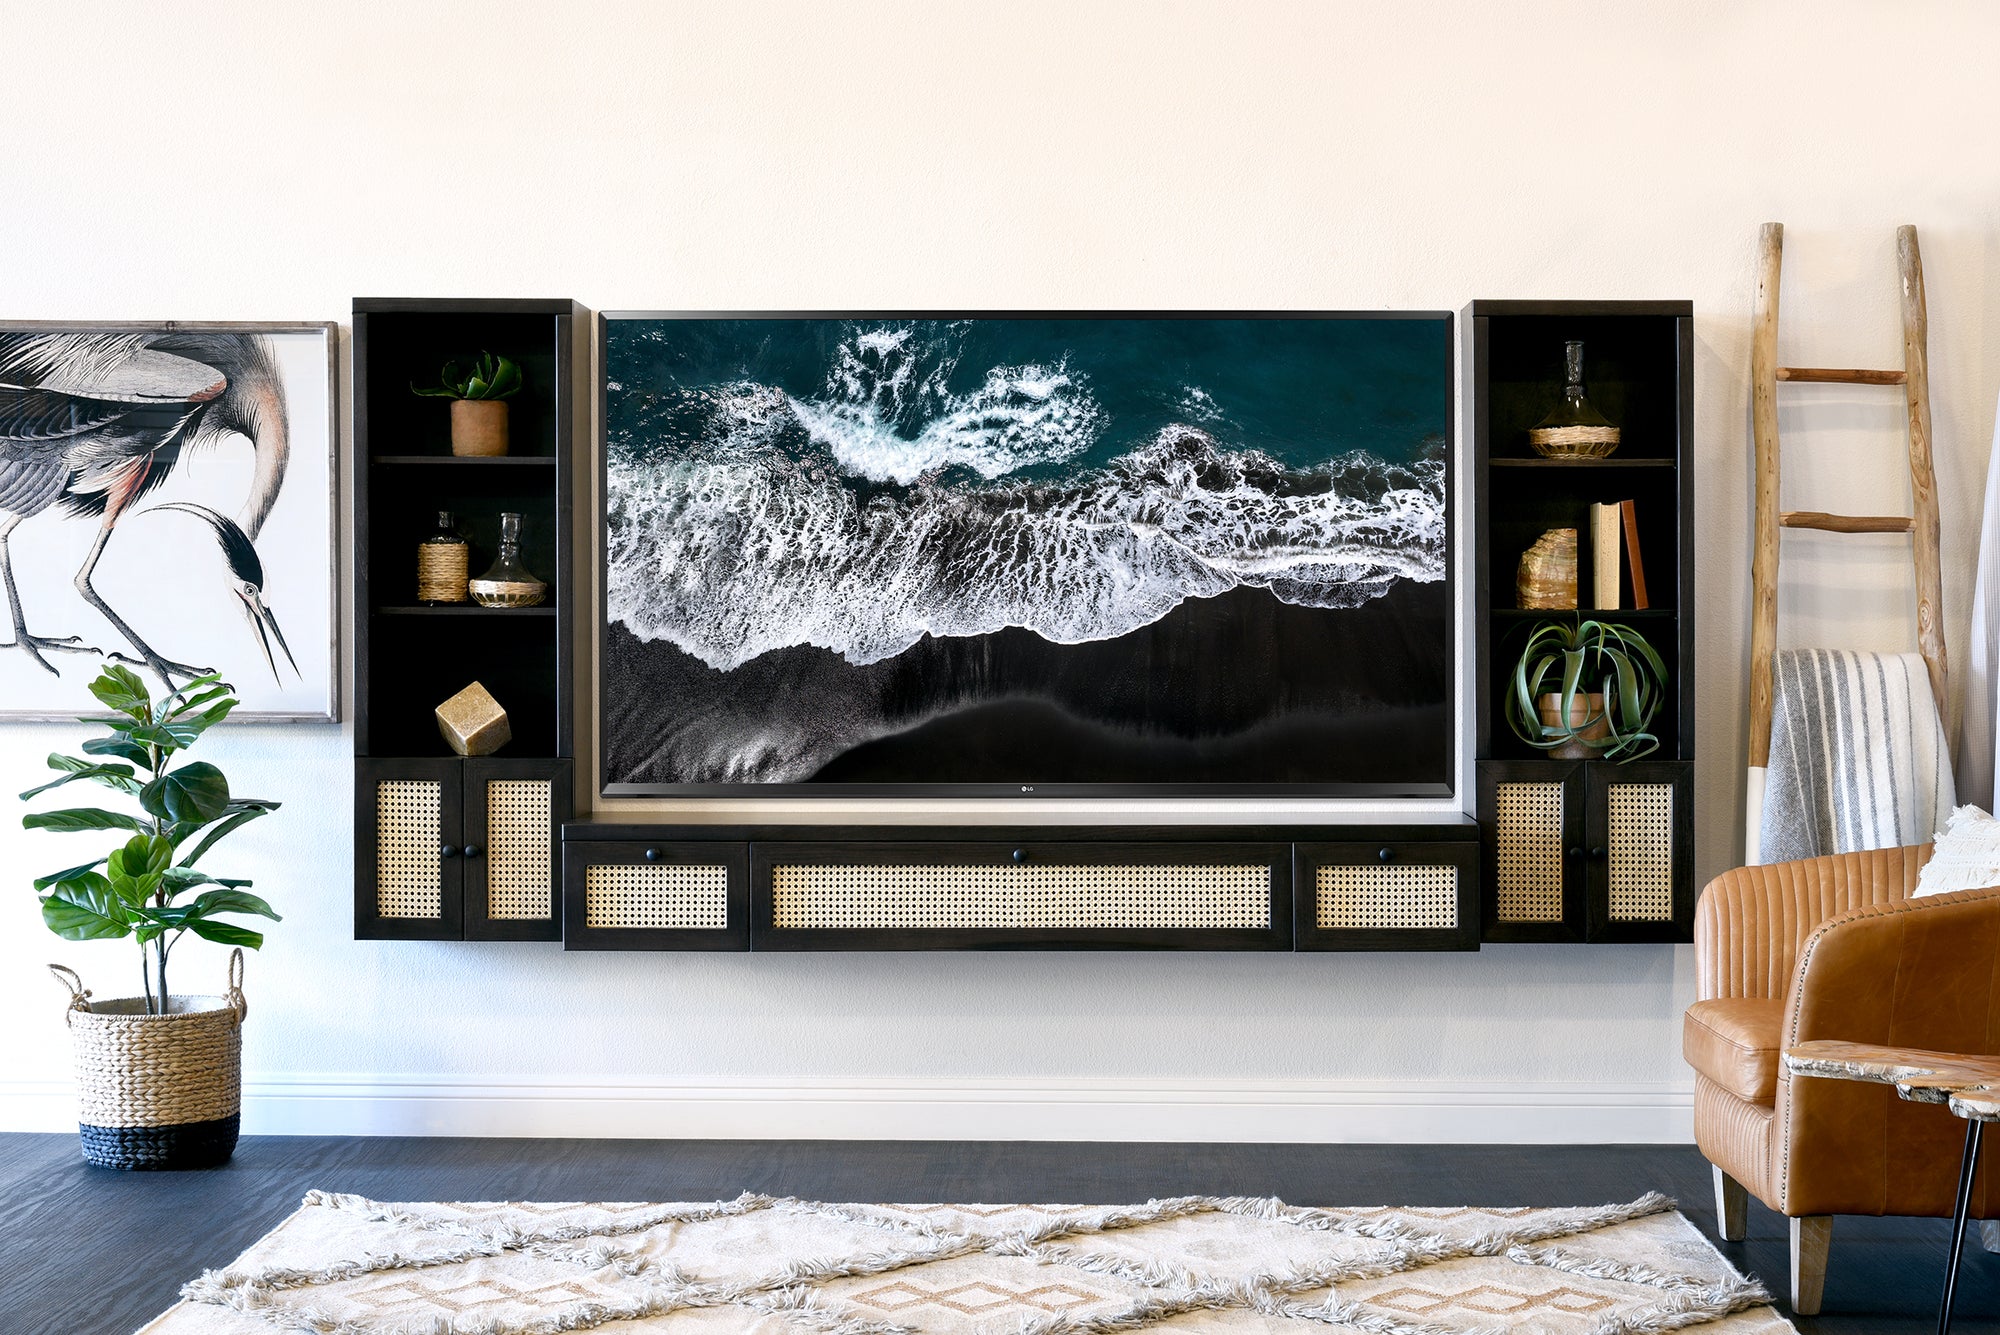 Midnight Sky Black Cane Floating TV Stand Wall Mount Entertainment Center Boho Rattan Wicker Console - Sugar Cane